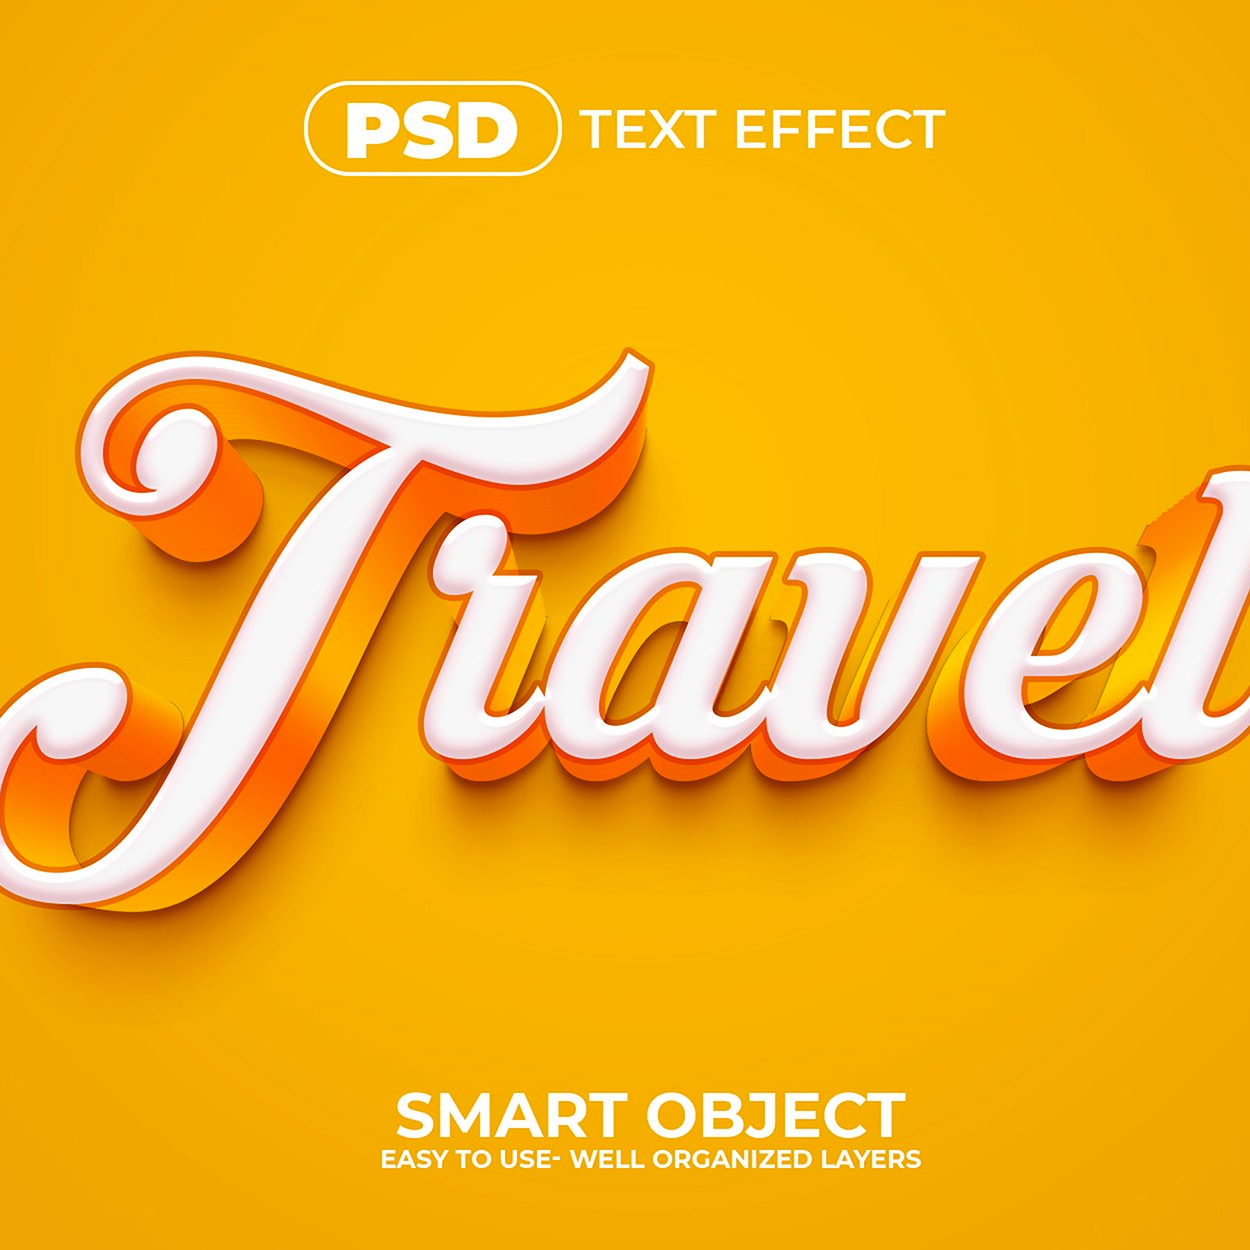 Travel 3d text effect main image.